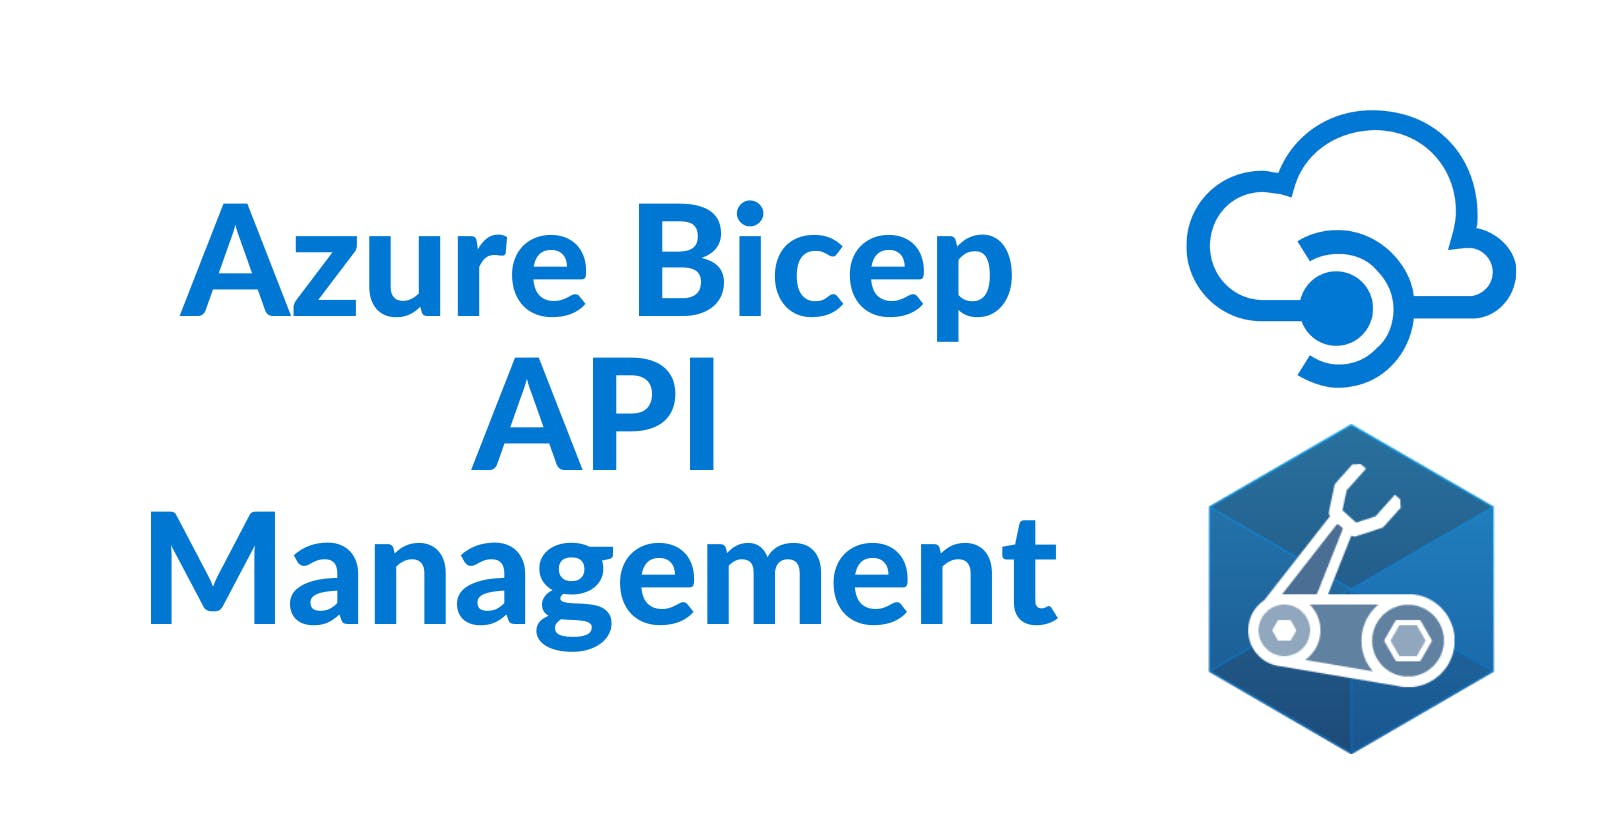 Azure Bicep: How to Provision an API Management